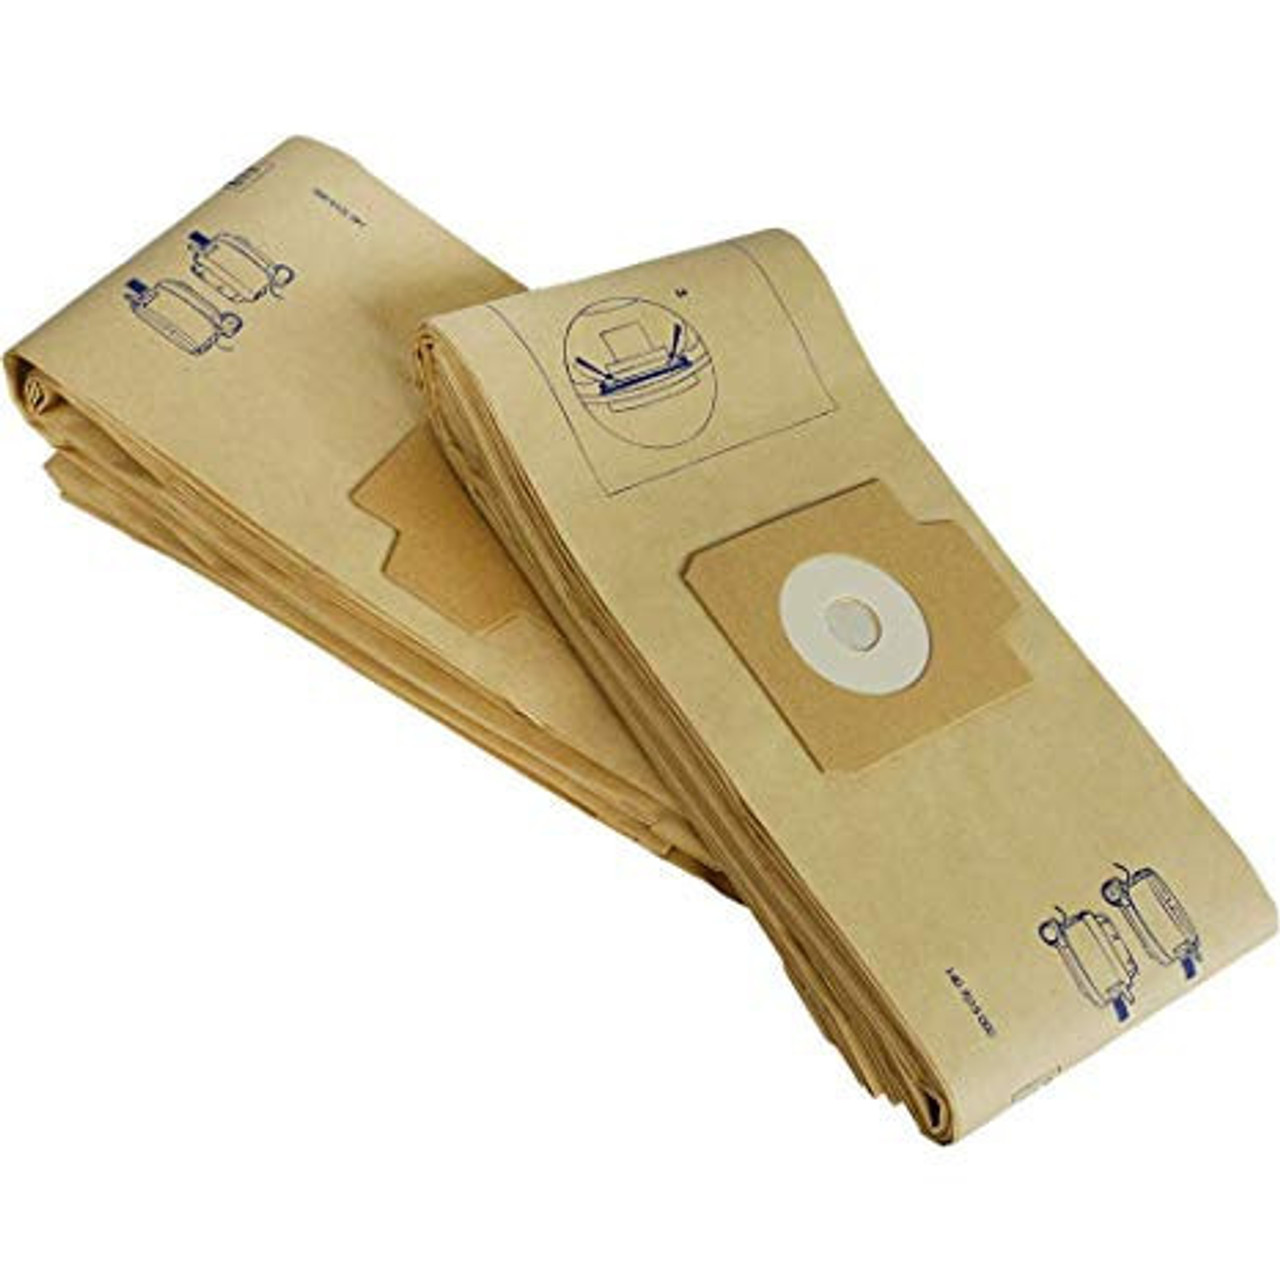 Replacement Air Dust Filters Bags for Karcher Vacuum Cleaners